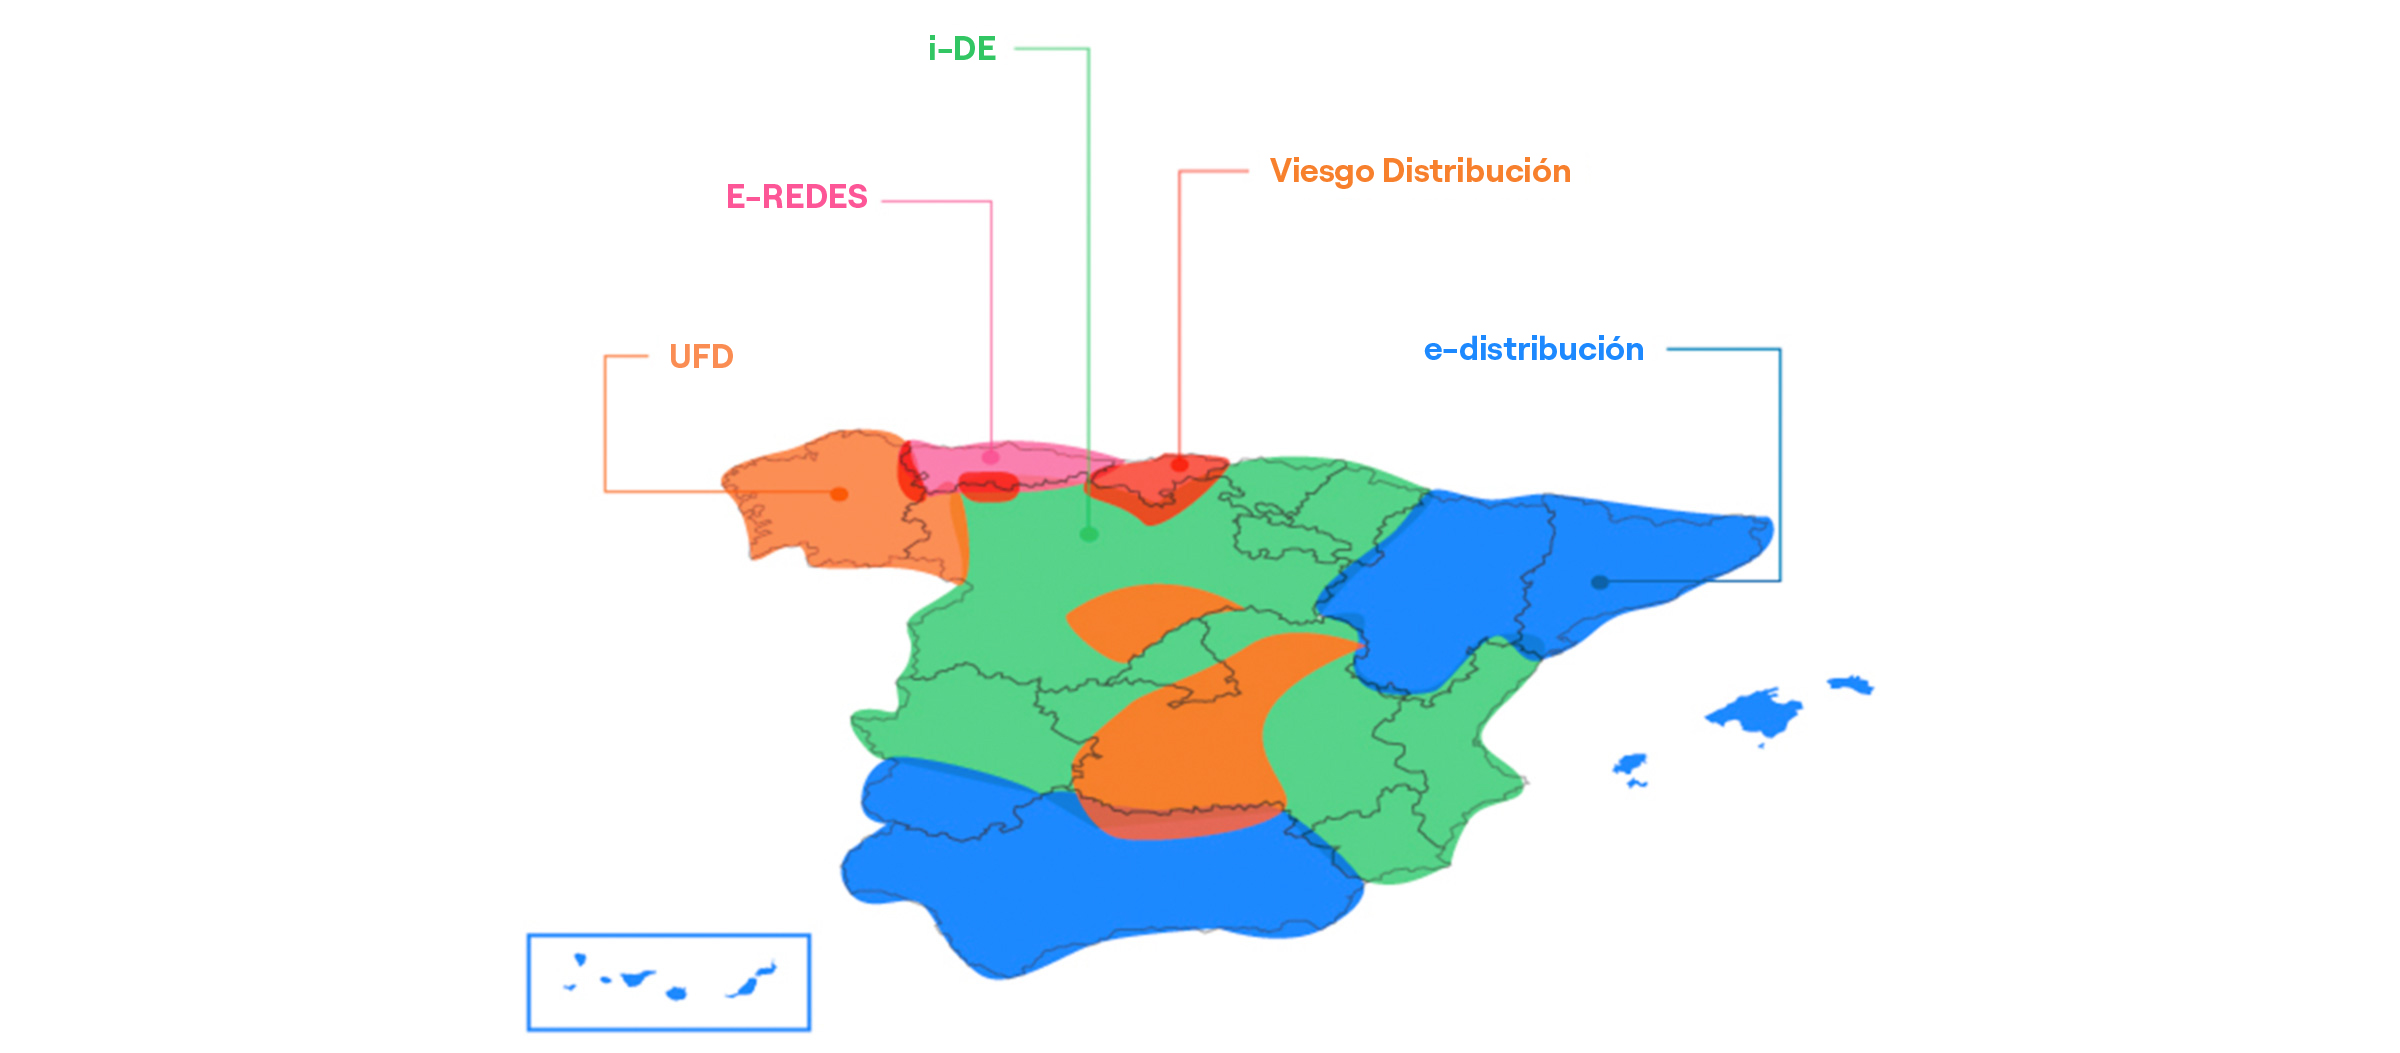 Map of Spain with the zone for each electricity distributor. The information is then explained afterwards in text.